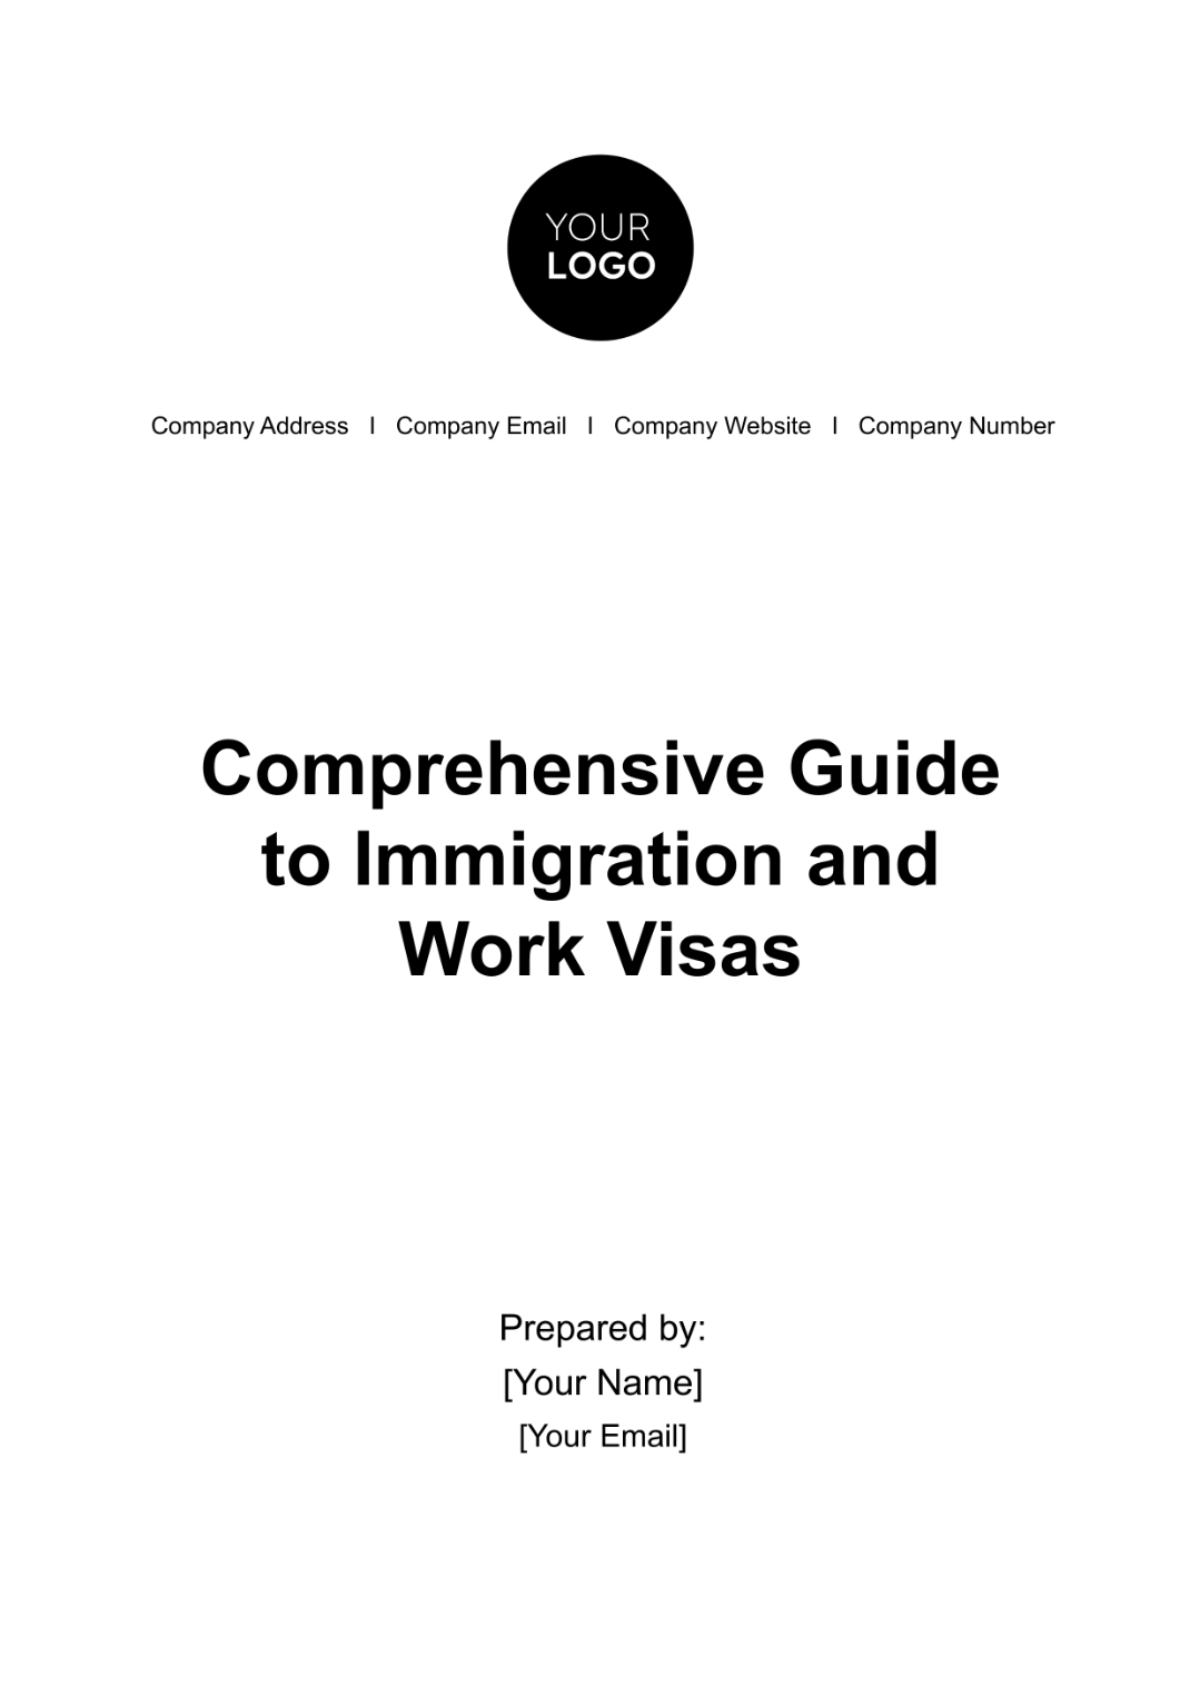 Free Comprehensive Guide to Immigration and Work Visas HR Template